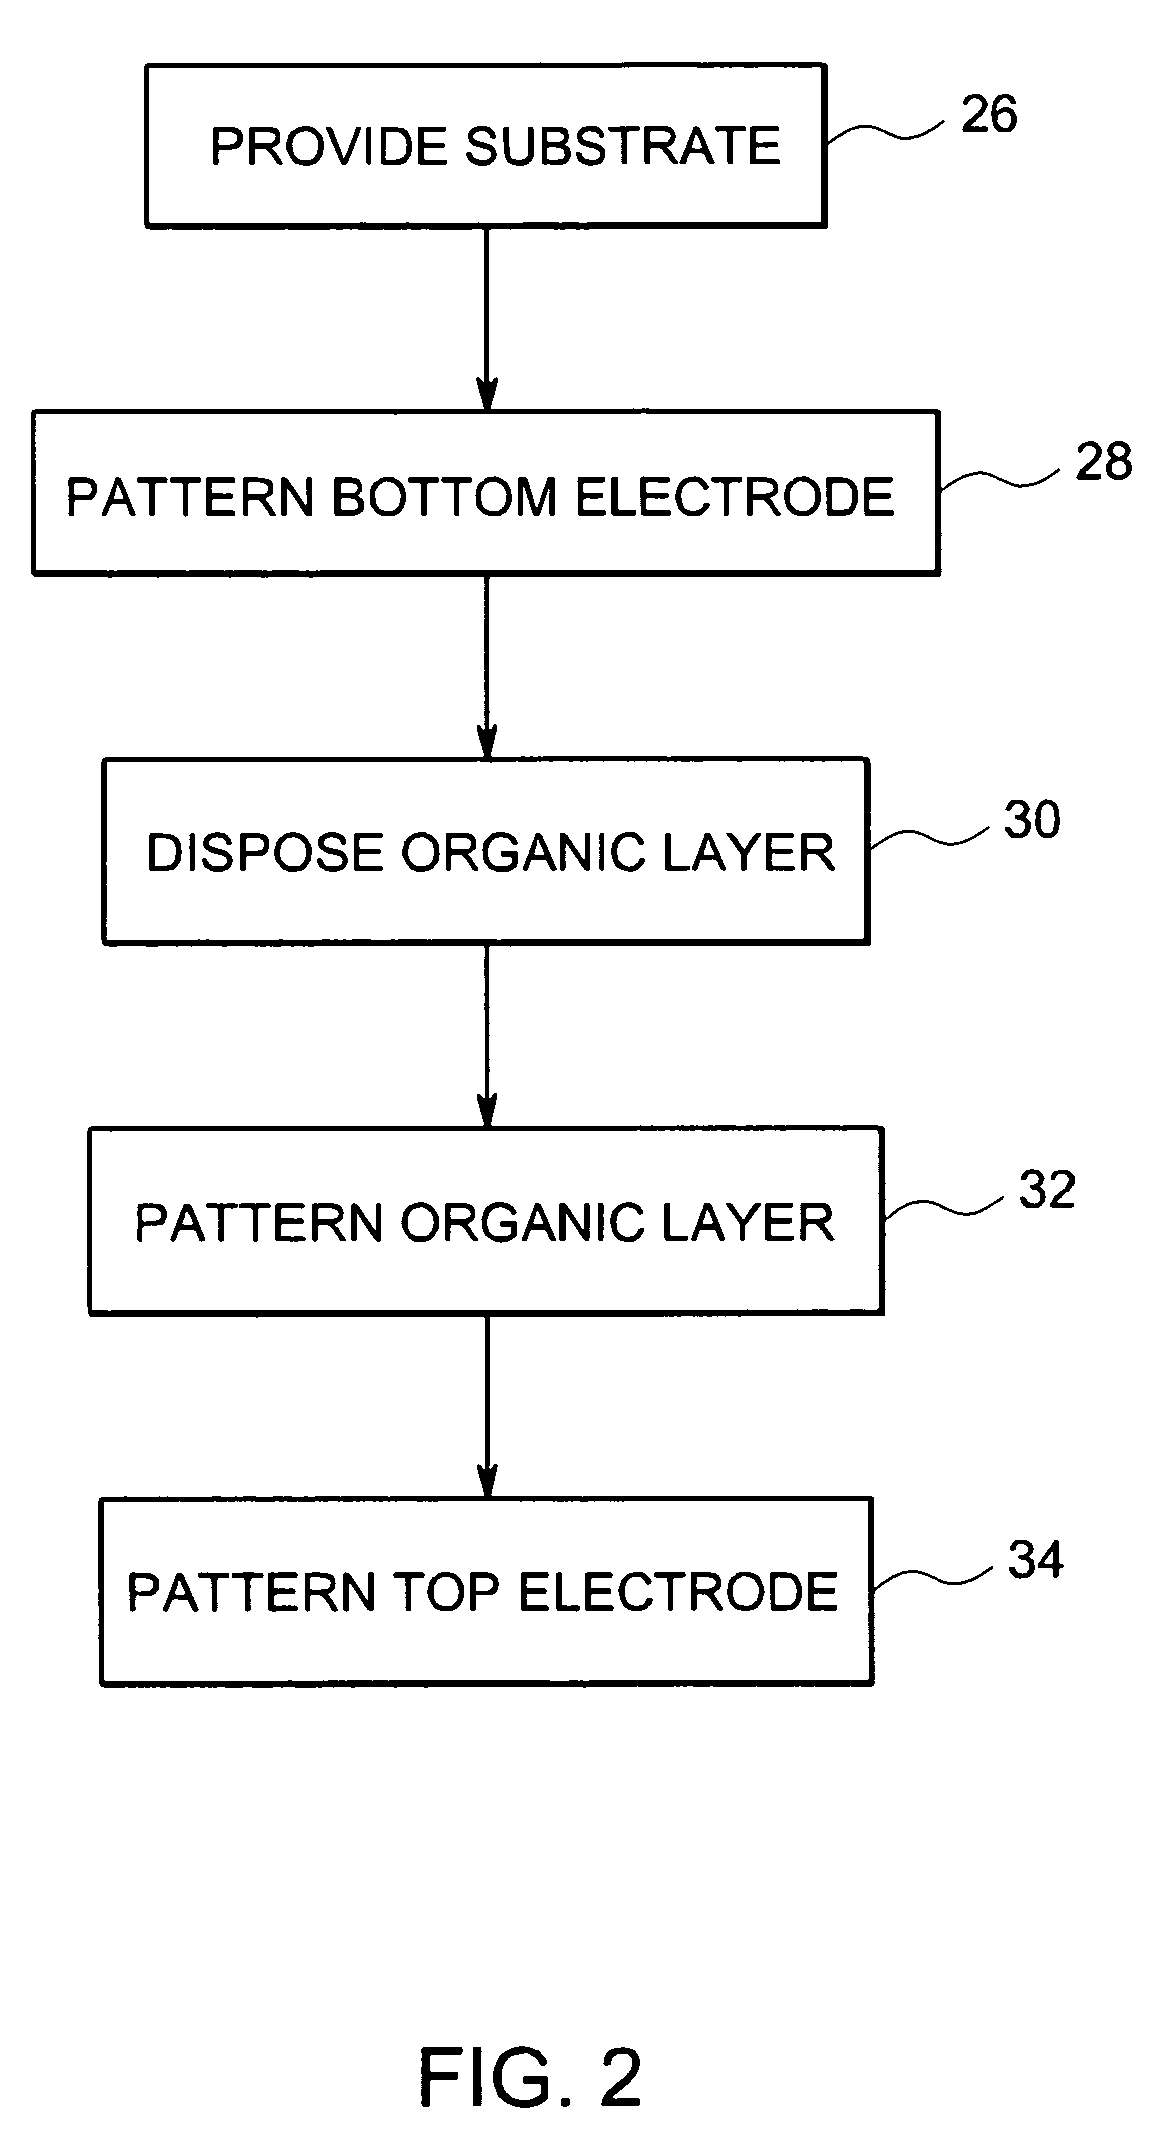 Full fault tolerant architecture for organic electronic devices